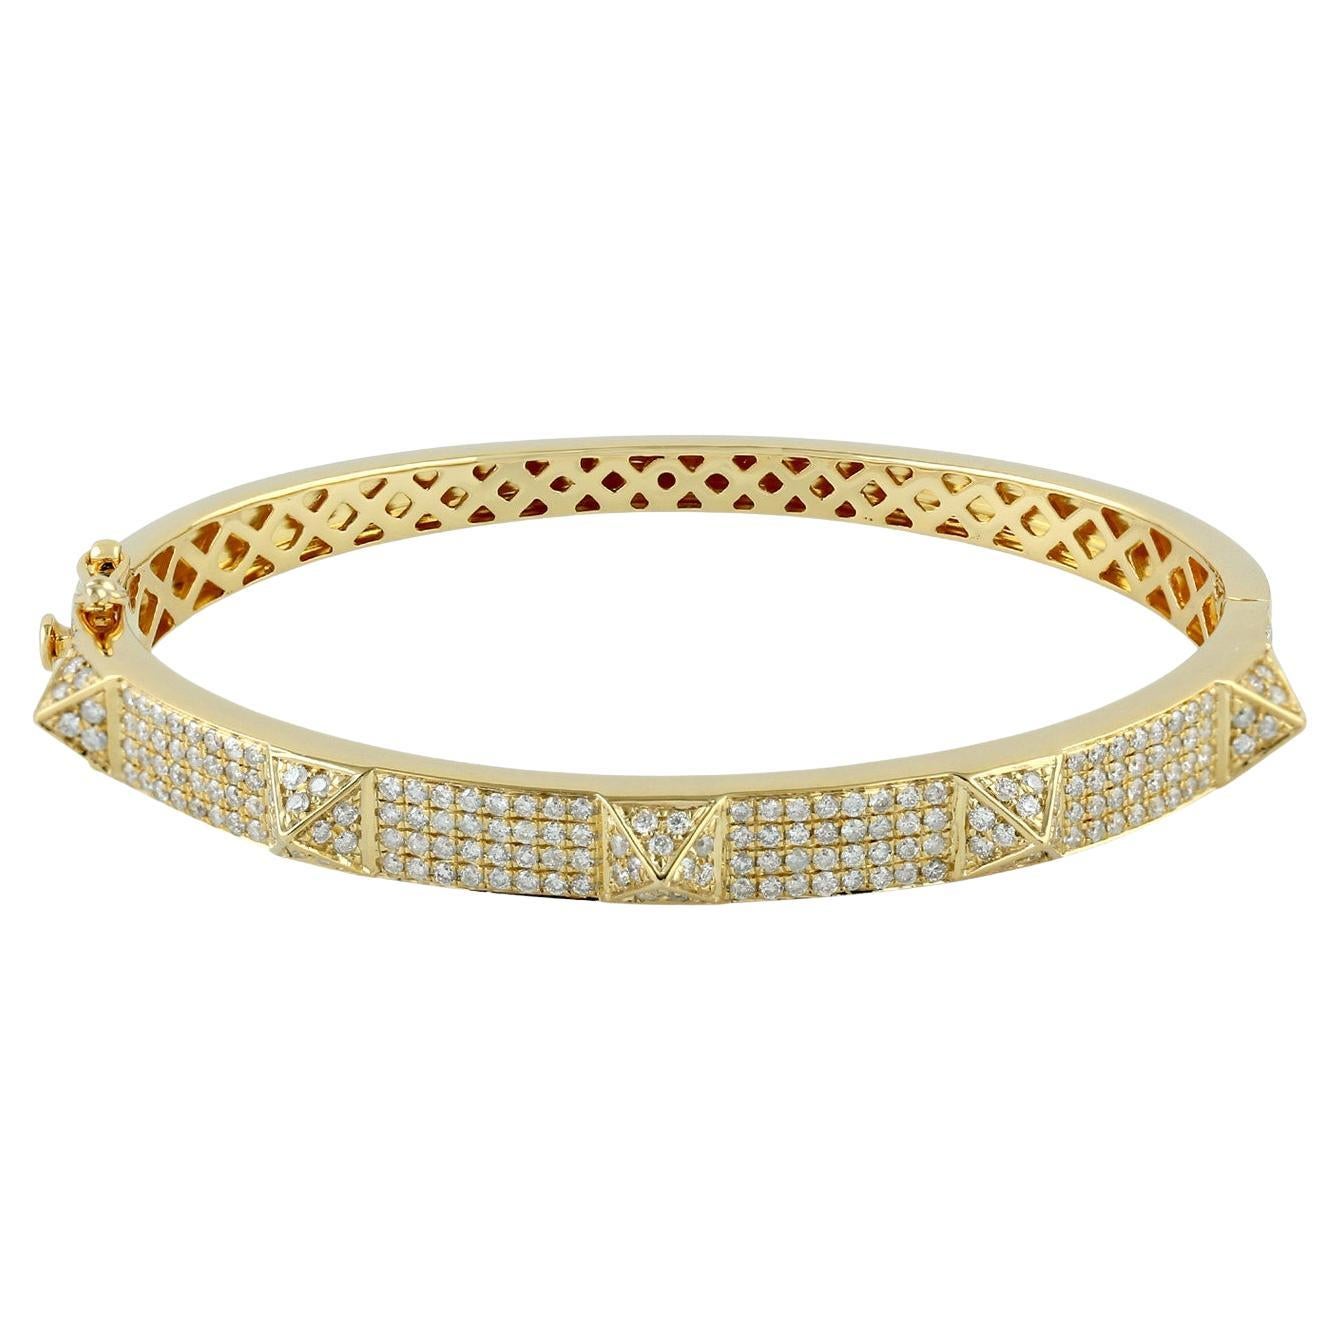 Pave Diamond Spike Bangle Made In 18k Yellow Gold